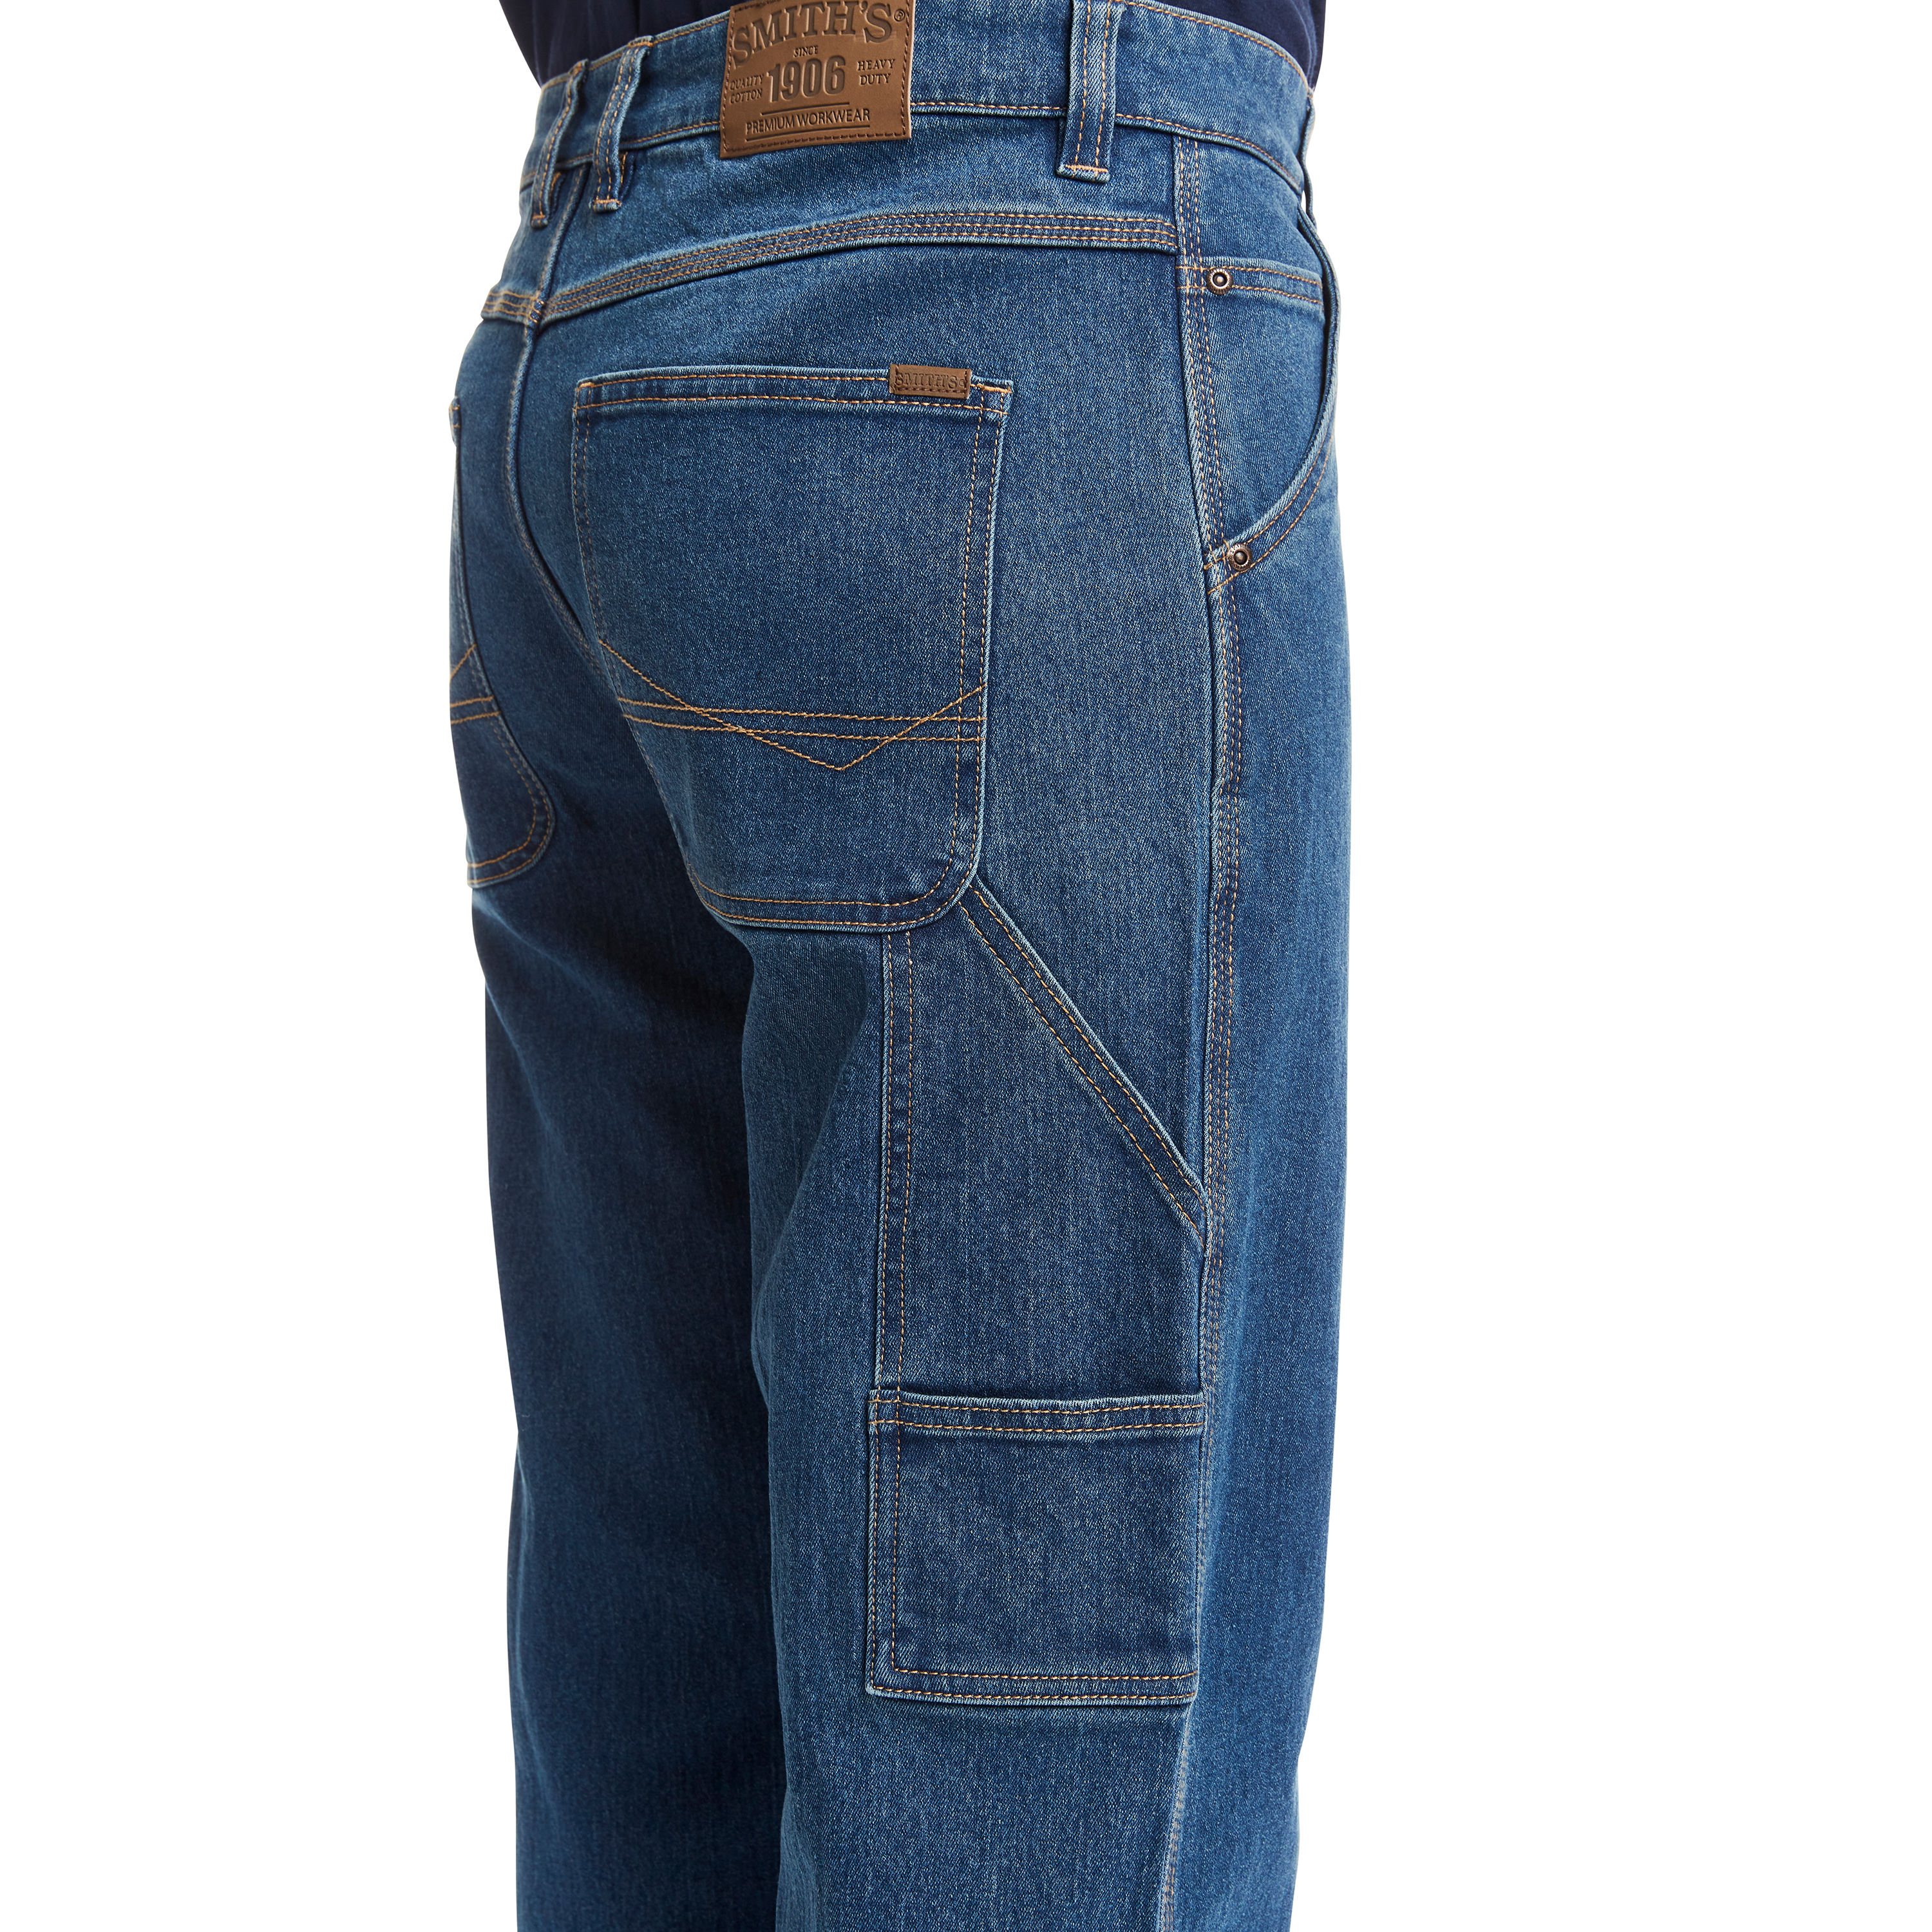 engagement tidligere Manners Smith's Workwear Men's Light Vintage Wash Denim Jean Work Pants (40 x 32)  in the Pants department at Lowes.com